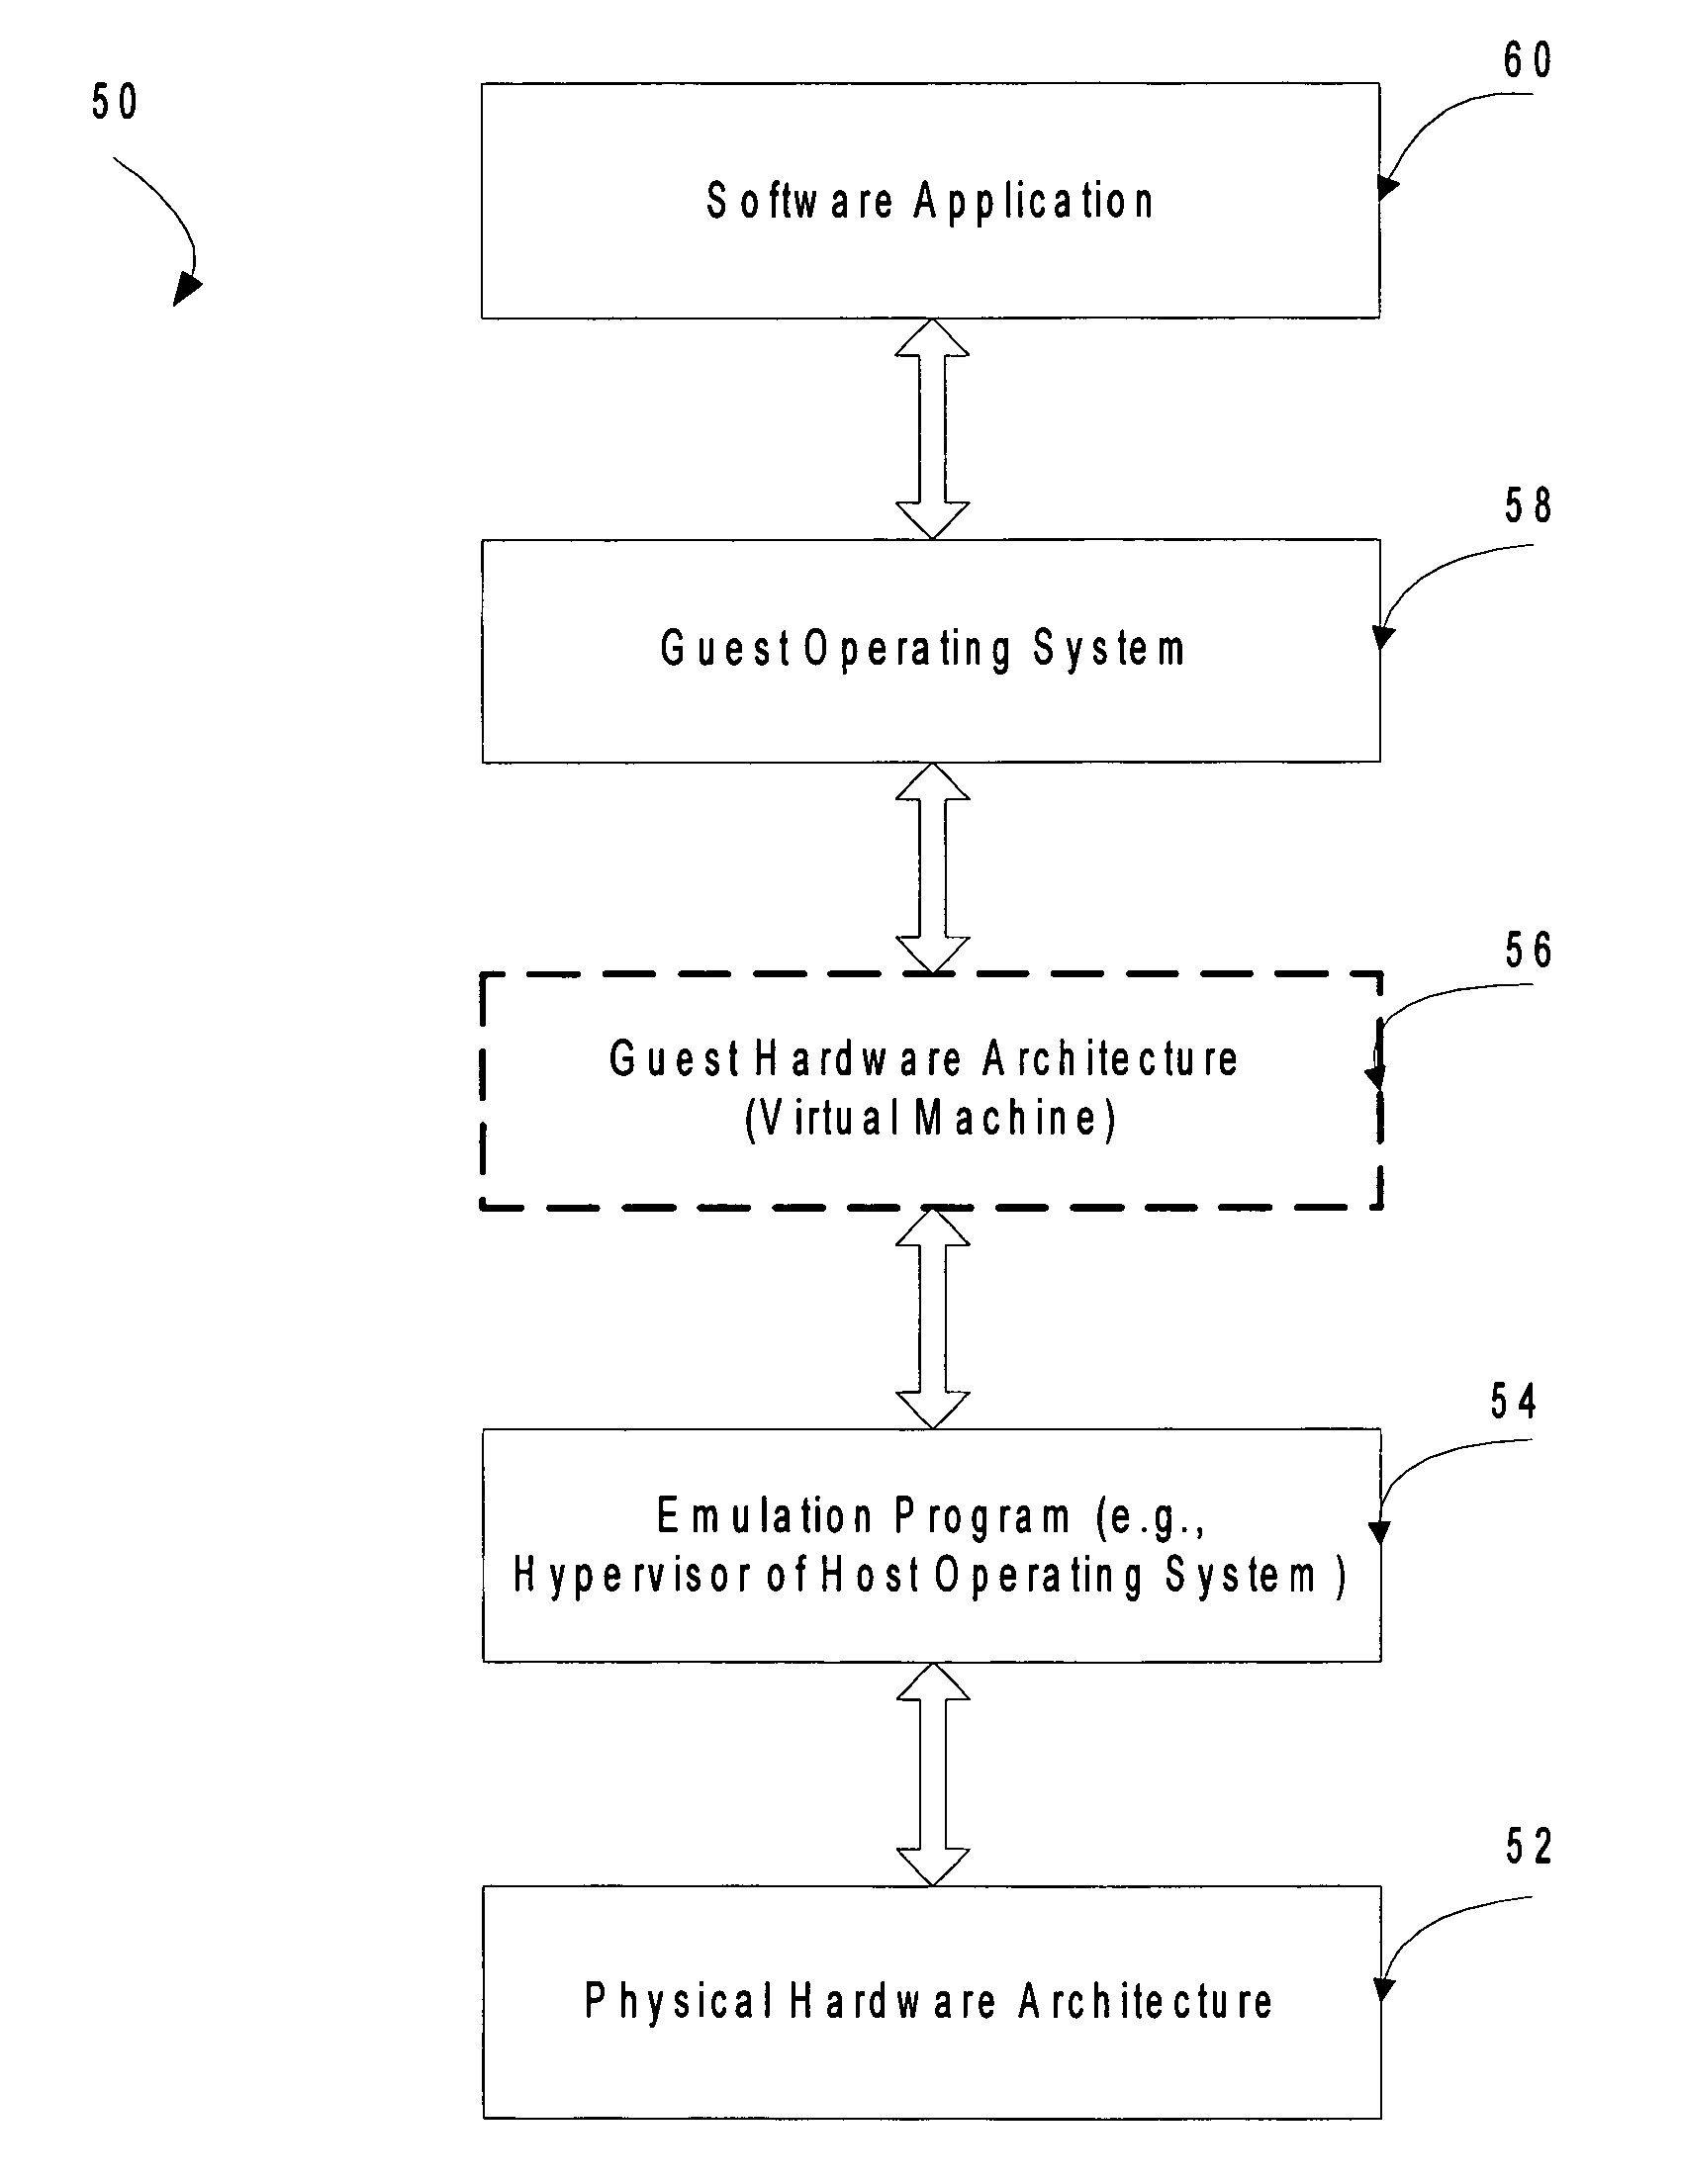 Mechanism to store information describing a virtual machine in a virtual disk image